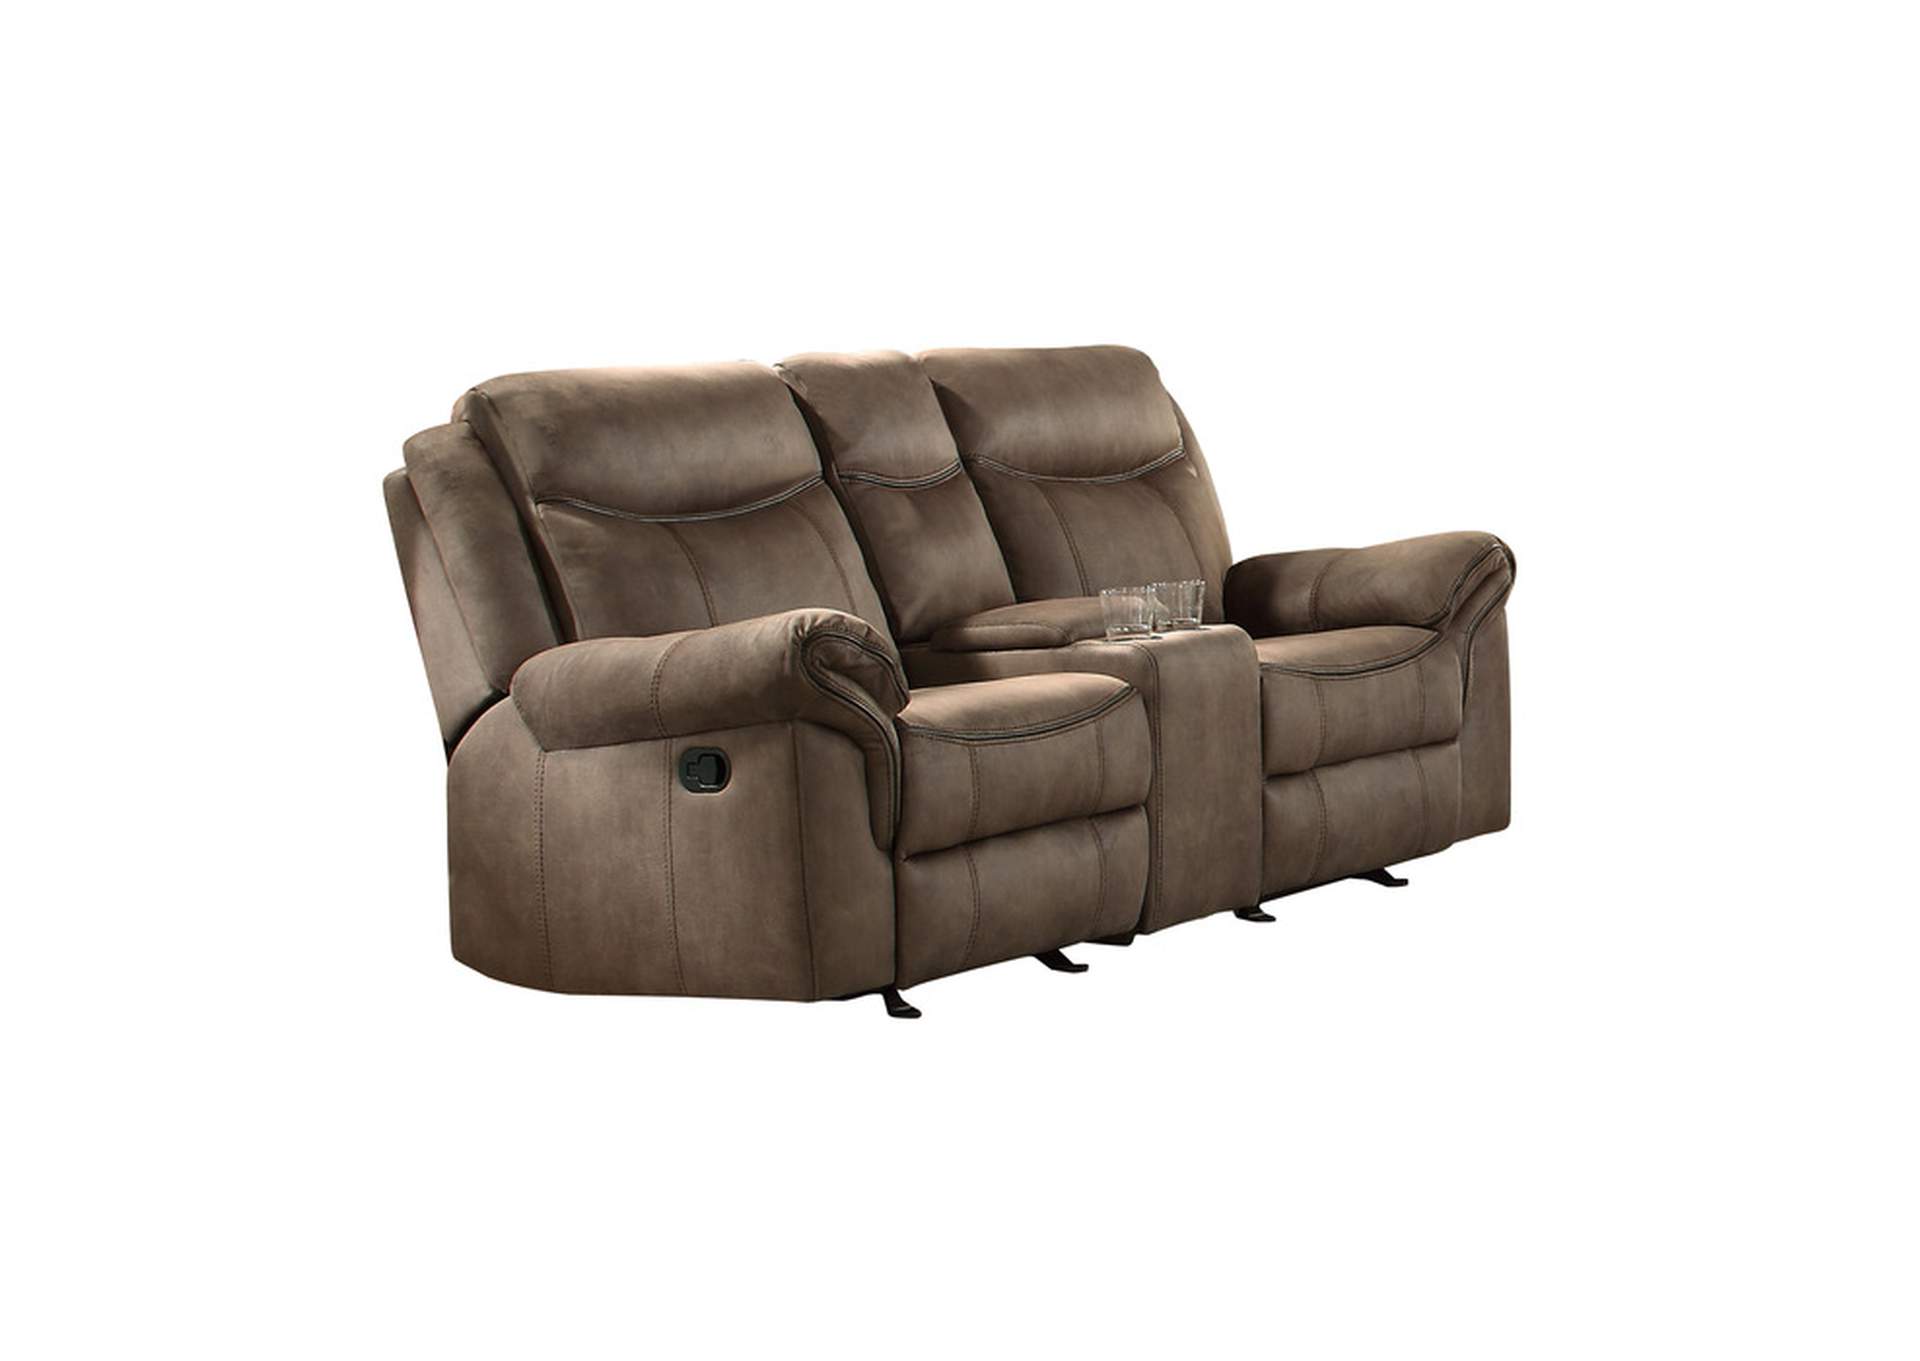 Aram Double Glider Reclining Love Seat with Center Console, Receptacles and USB Ports,Homelegance